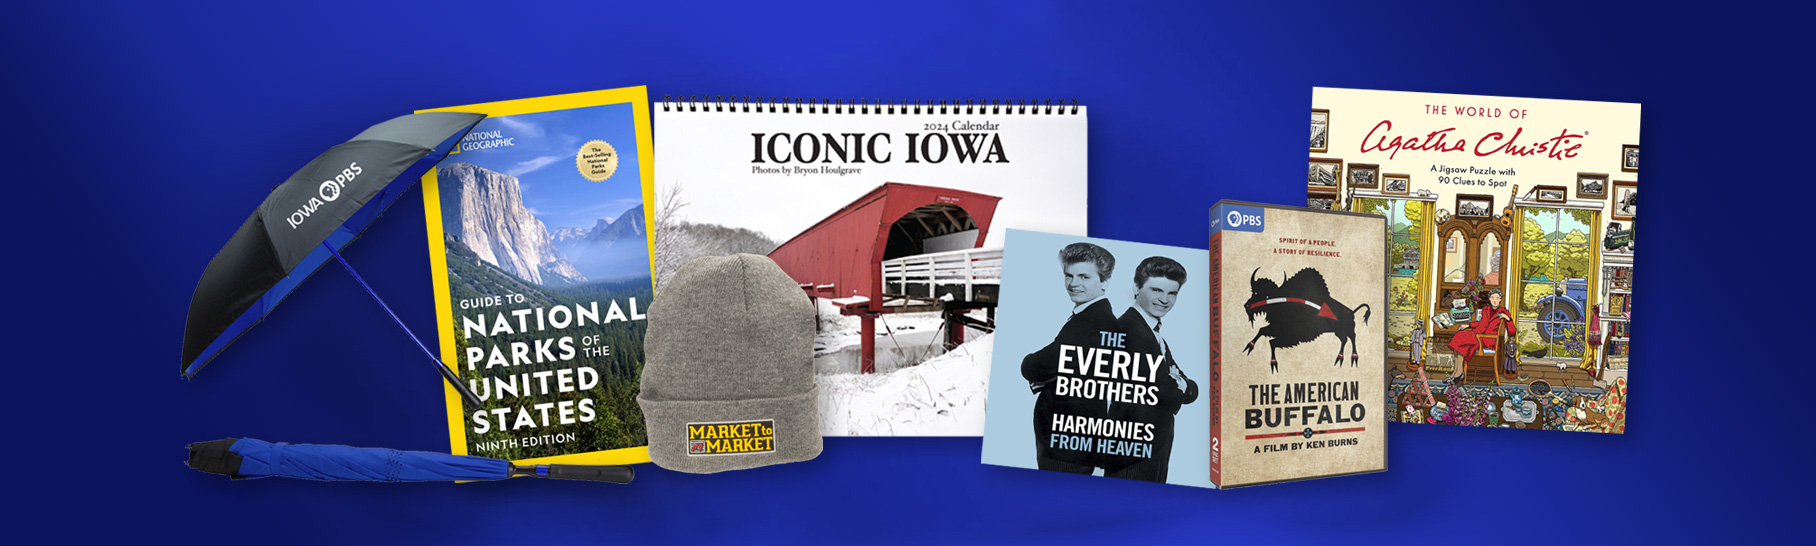 Iowa PBS logo umbrella, Guide to the National Parks, Iconic Iowa calendar, music by the Everly Brothers, The American Buffalo on DVD, Agatha Christie puzzle